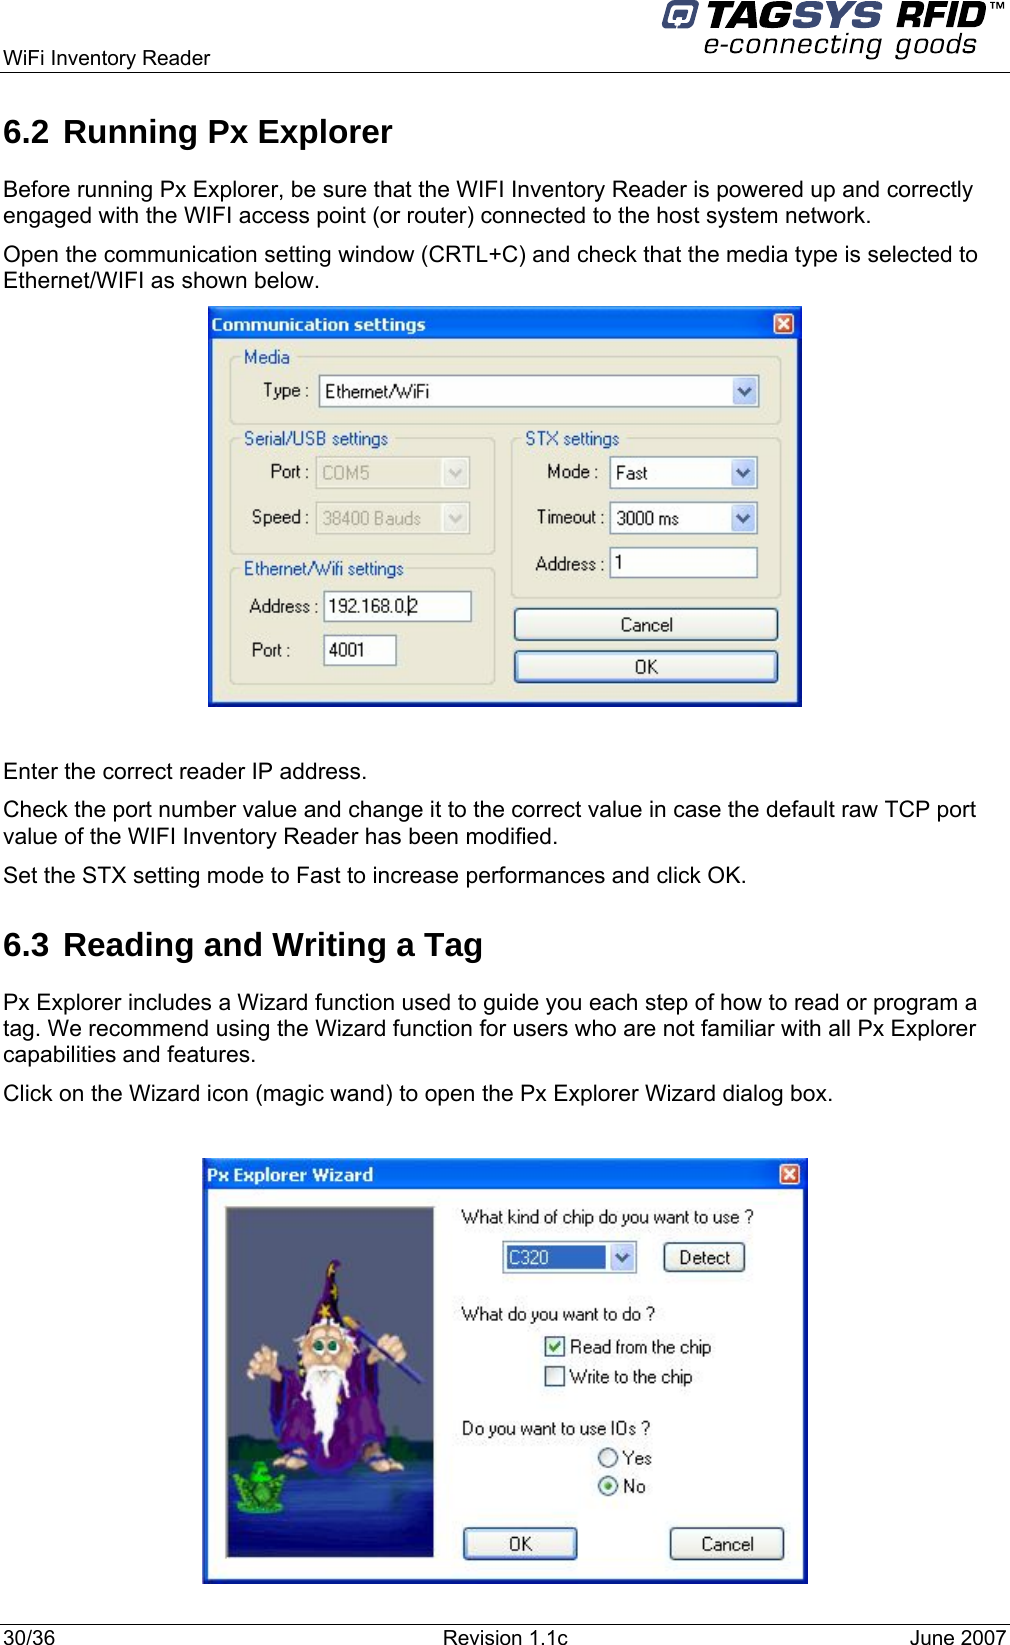  WiFi Inventory Reader     6.2 Running Px Explorer Before running Px Explorer, be sure that the WIFI Inventory Reader is powered up and correctly engaged with the WIFI access point (or router) connected to the host system network. Open the communication setting window (CRTL+C) and check that the media type is selected to Ethernet/WIFI as shown below.   Enter the correct reader IP address. Check the port number value and change it to the correct value in case the default raw TCP port value of the WIFI Inventory Reader has been modified. Set the STX setting mode to Fast to increase performances and click OK. 6.3 Reading and Writing a Tag Px Explorer includes a Wizard function used to guide you each step of how to read or program a tag. We recommend using the Wizard function for users who are not familiar with all Px Explorer capabilities and features. Click on the Wizard icon (magic wand) to open the Px Explorer Wizard dialog box.   30/36  Revision 1.1c  June 2007  